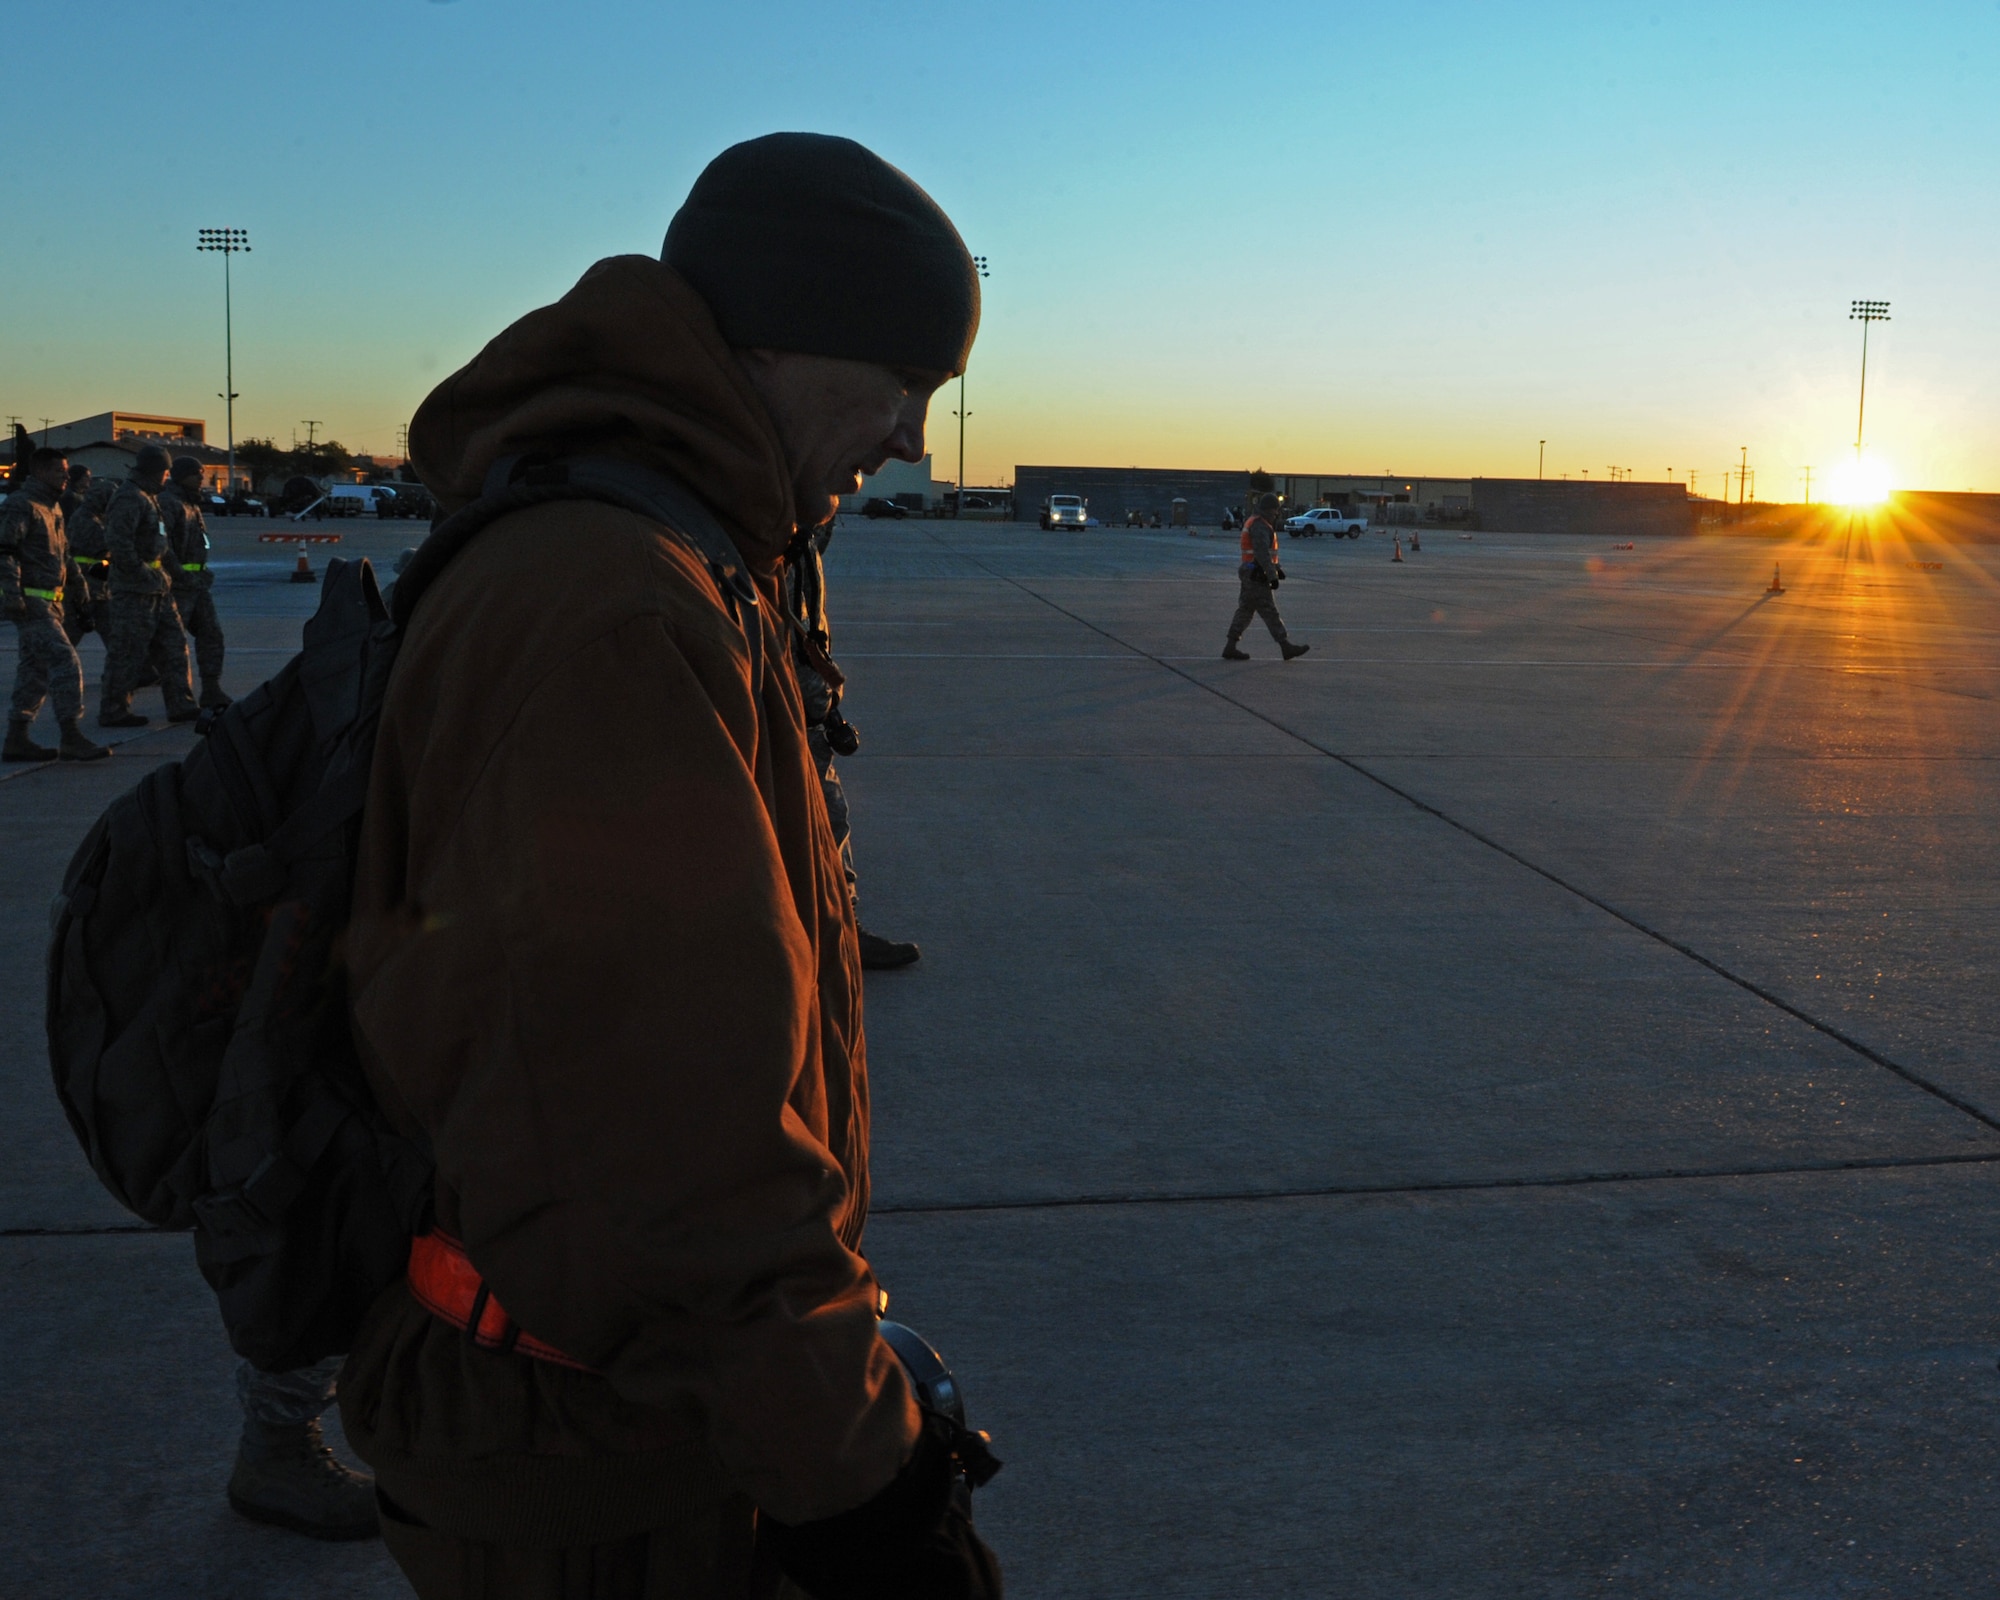 Staff Sgt. Alex Speener, 7th Equipment Maintenance Squadron, participates in a Foreign Object Debris walk Nov. 3, 2011, at Dyess Air Force Base, Texas. Examples of FOD are aircraft parts, rocks, broken pavement, ramp equipment, tools, bolts and vehicle parts. (U.S. Air Force photo by Airman 1st Class Peter Thompson/Released)